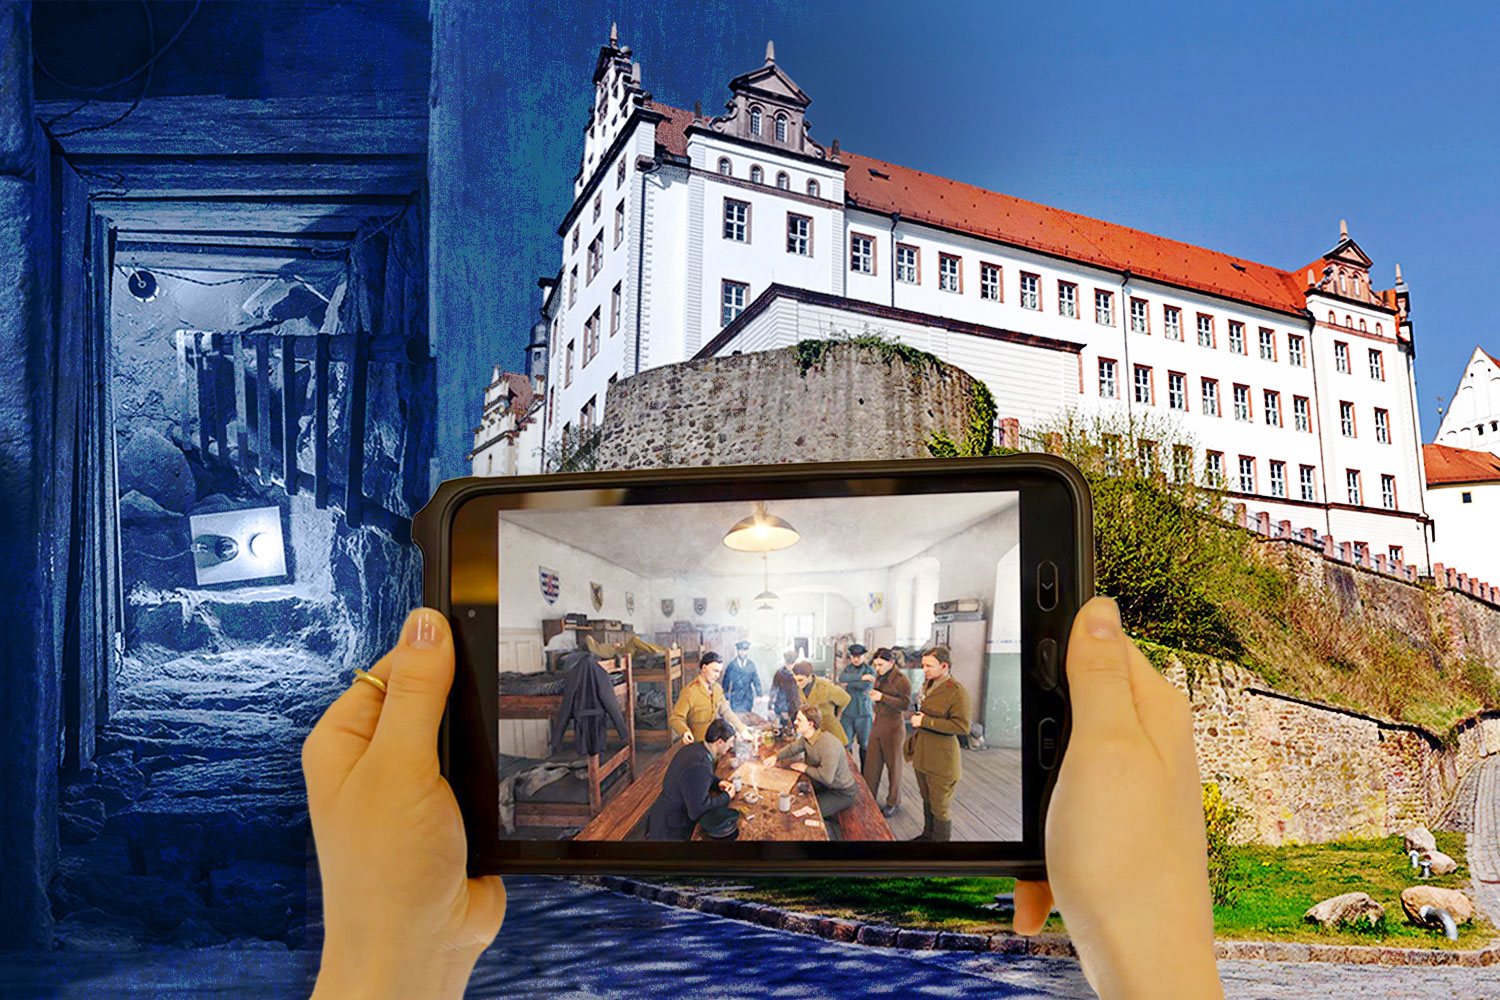 Visitors will be able to wander the rooms and corridors of the German castle thanks to an interactive tablet device